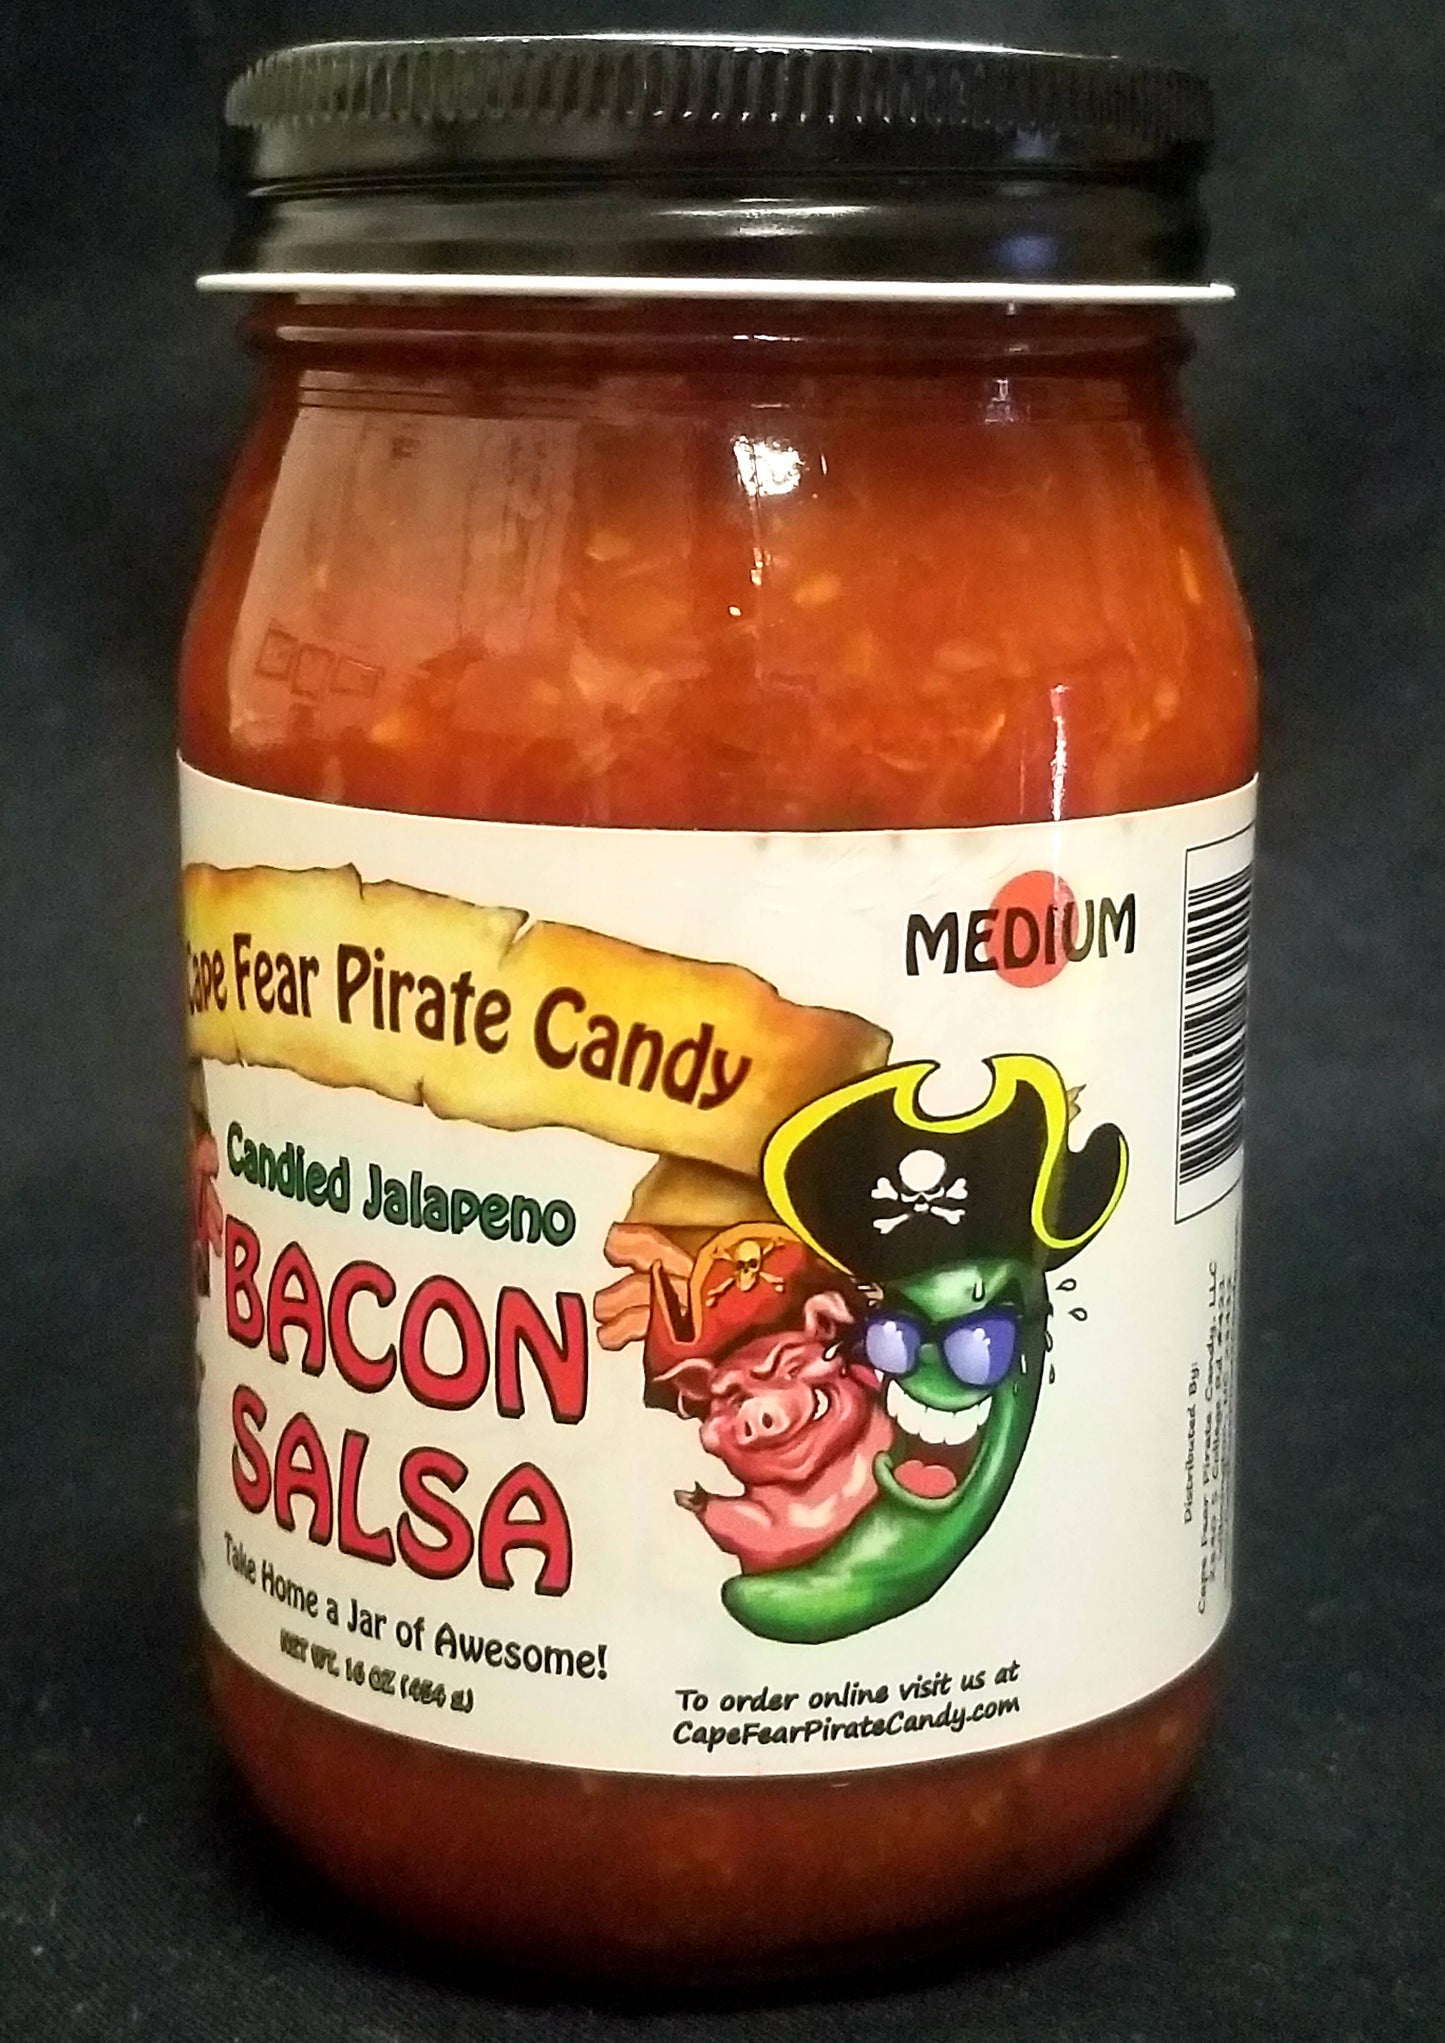 Candied Jalapeno Bacon Salsa